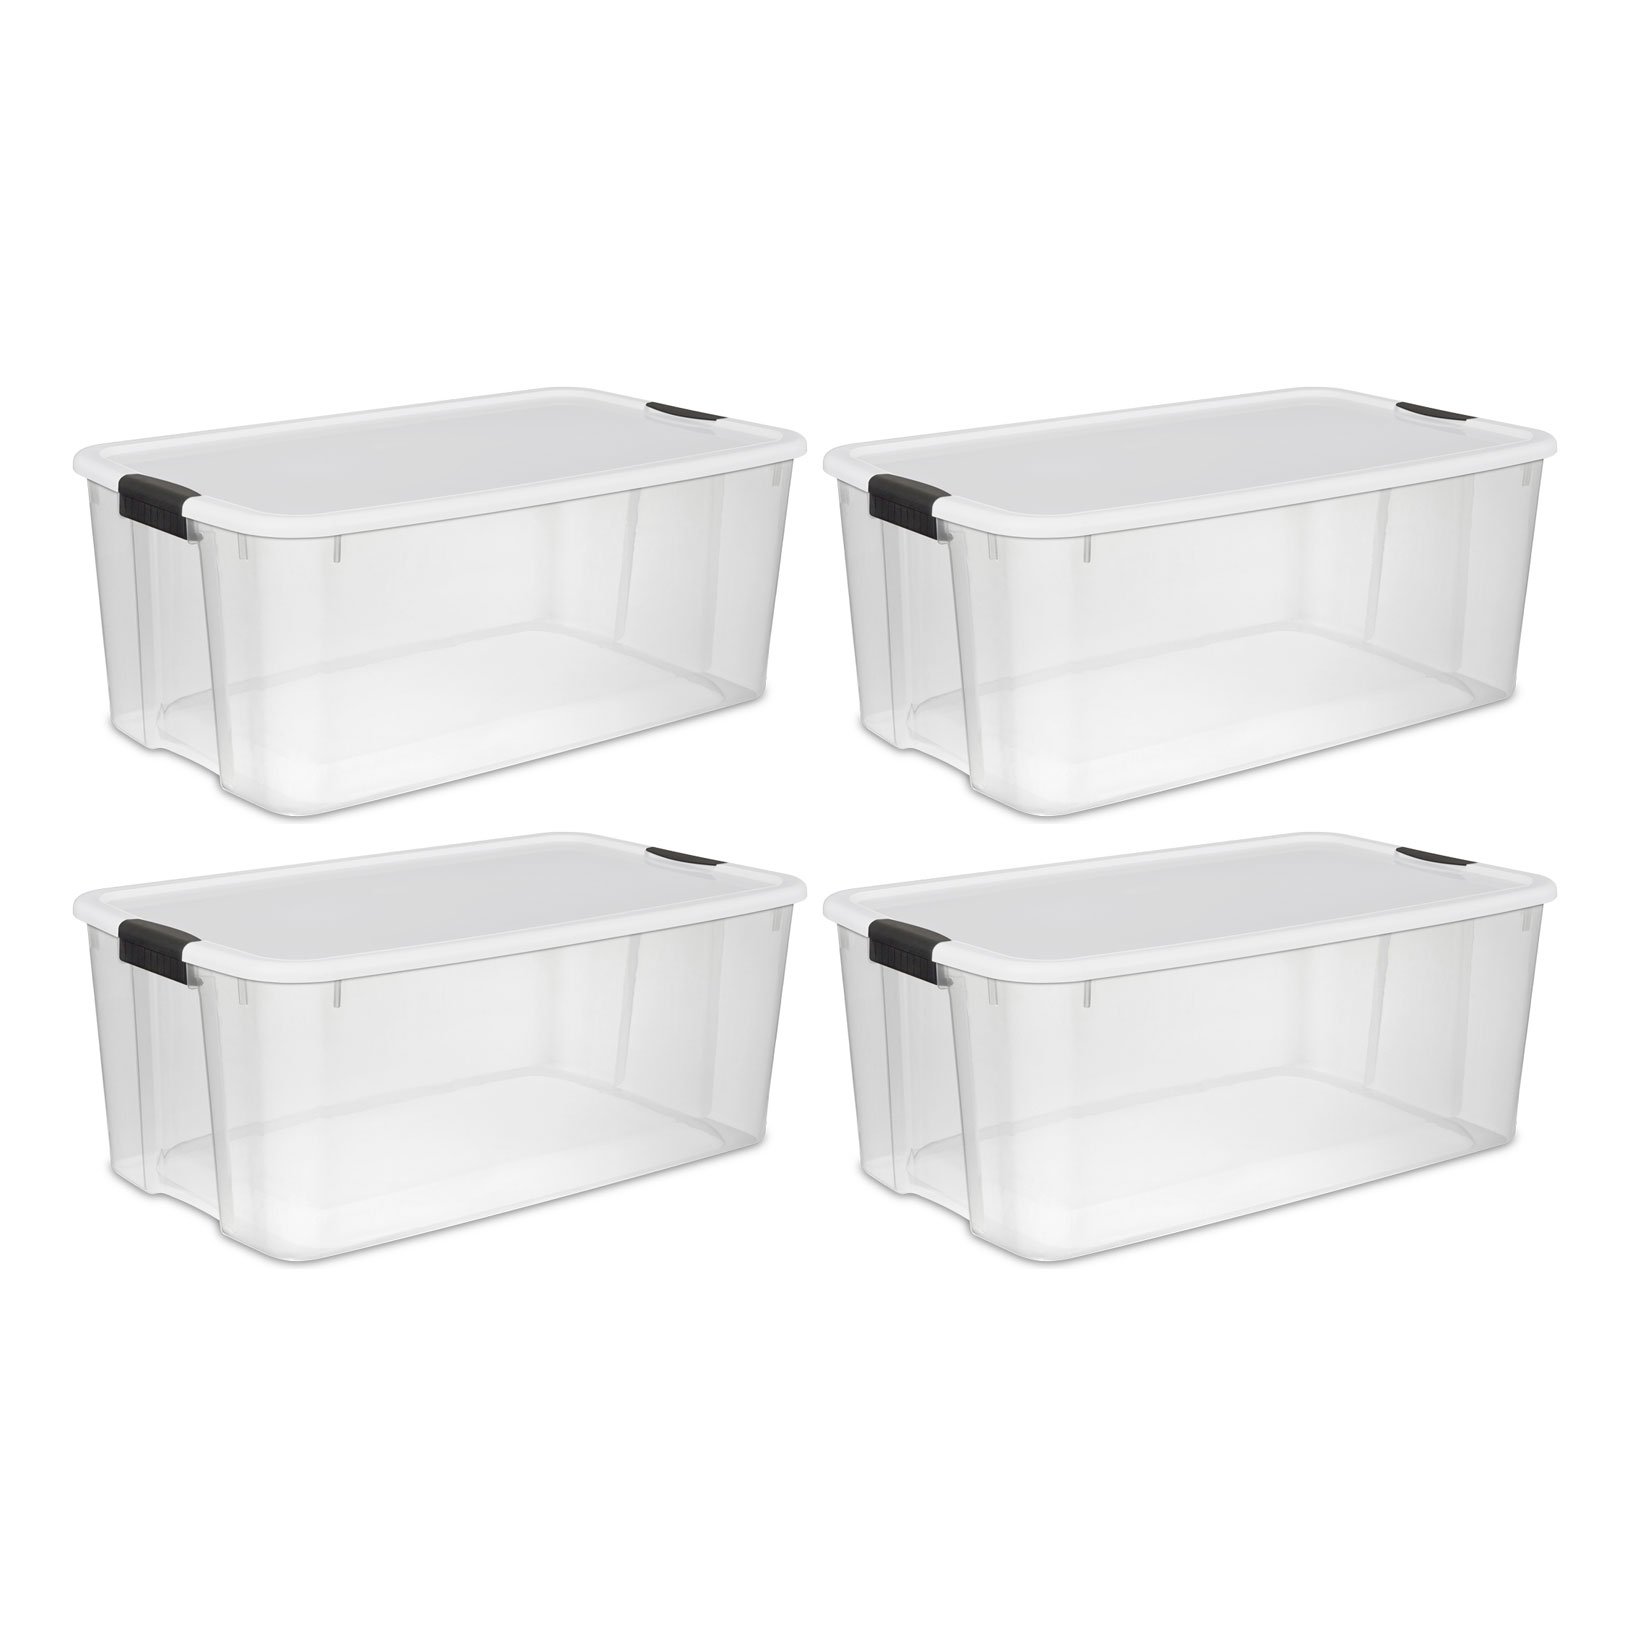 Photo 2 of Sterilite 116 Quart Ultra Latching Clear Plastic Storage Tote Container 4 Pack